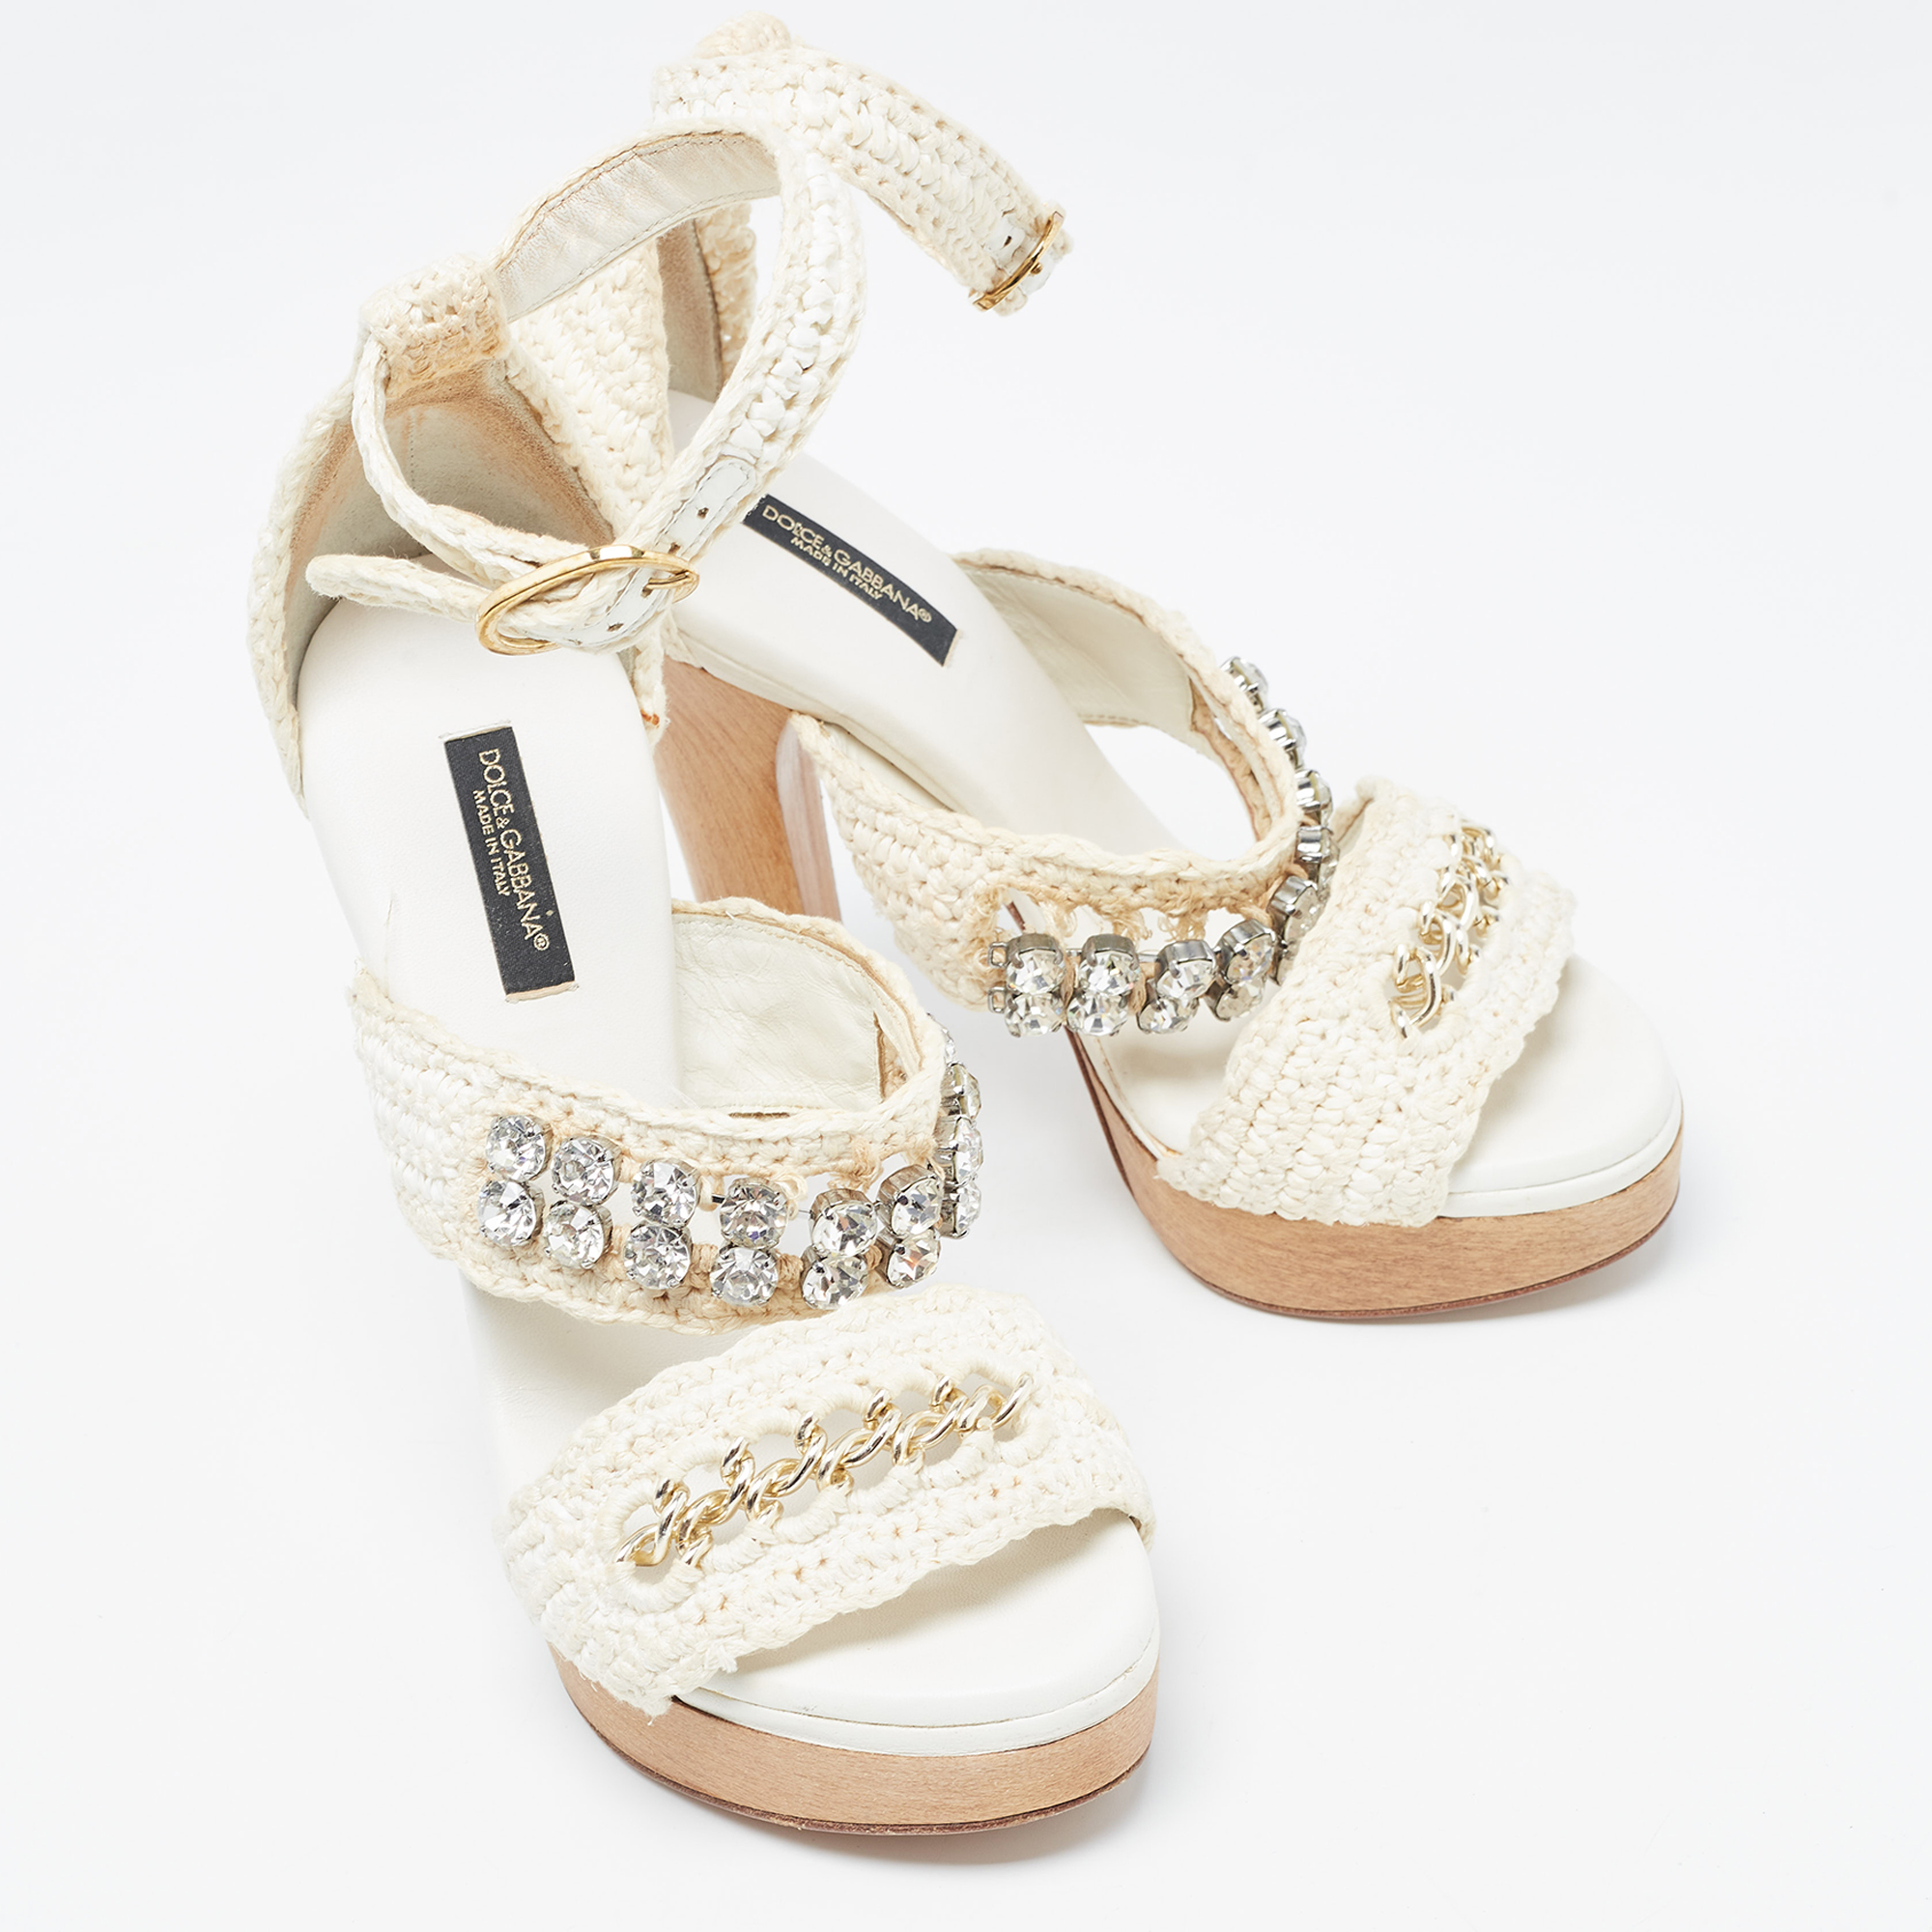 Dolce & Gabbana White Woven Lace Crystal Embellished Ankle Strap Sandals Size 37